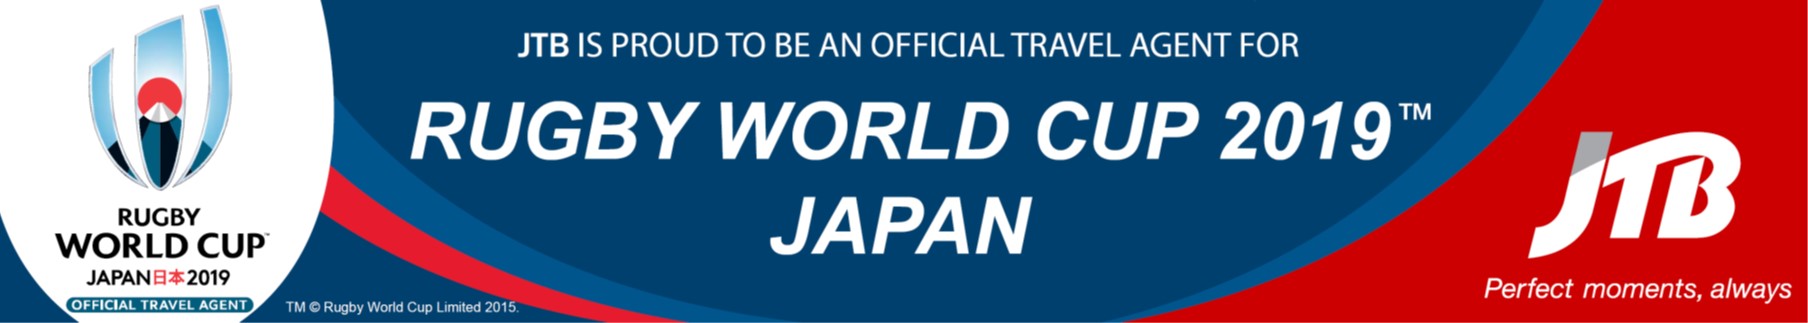 JTB Rugby World Cup 2019™, Japan Packages